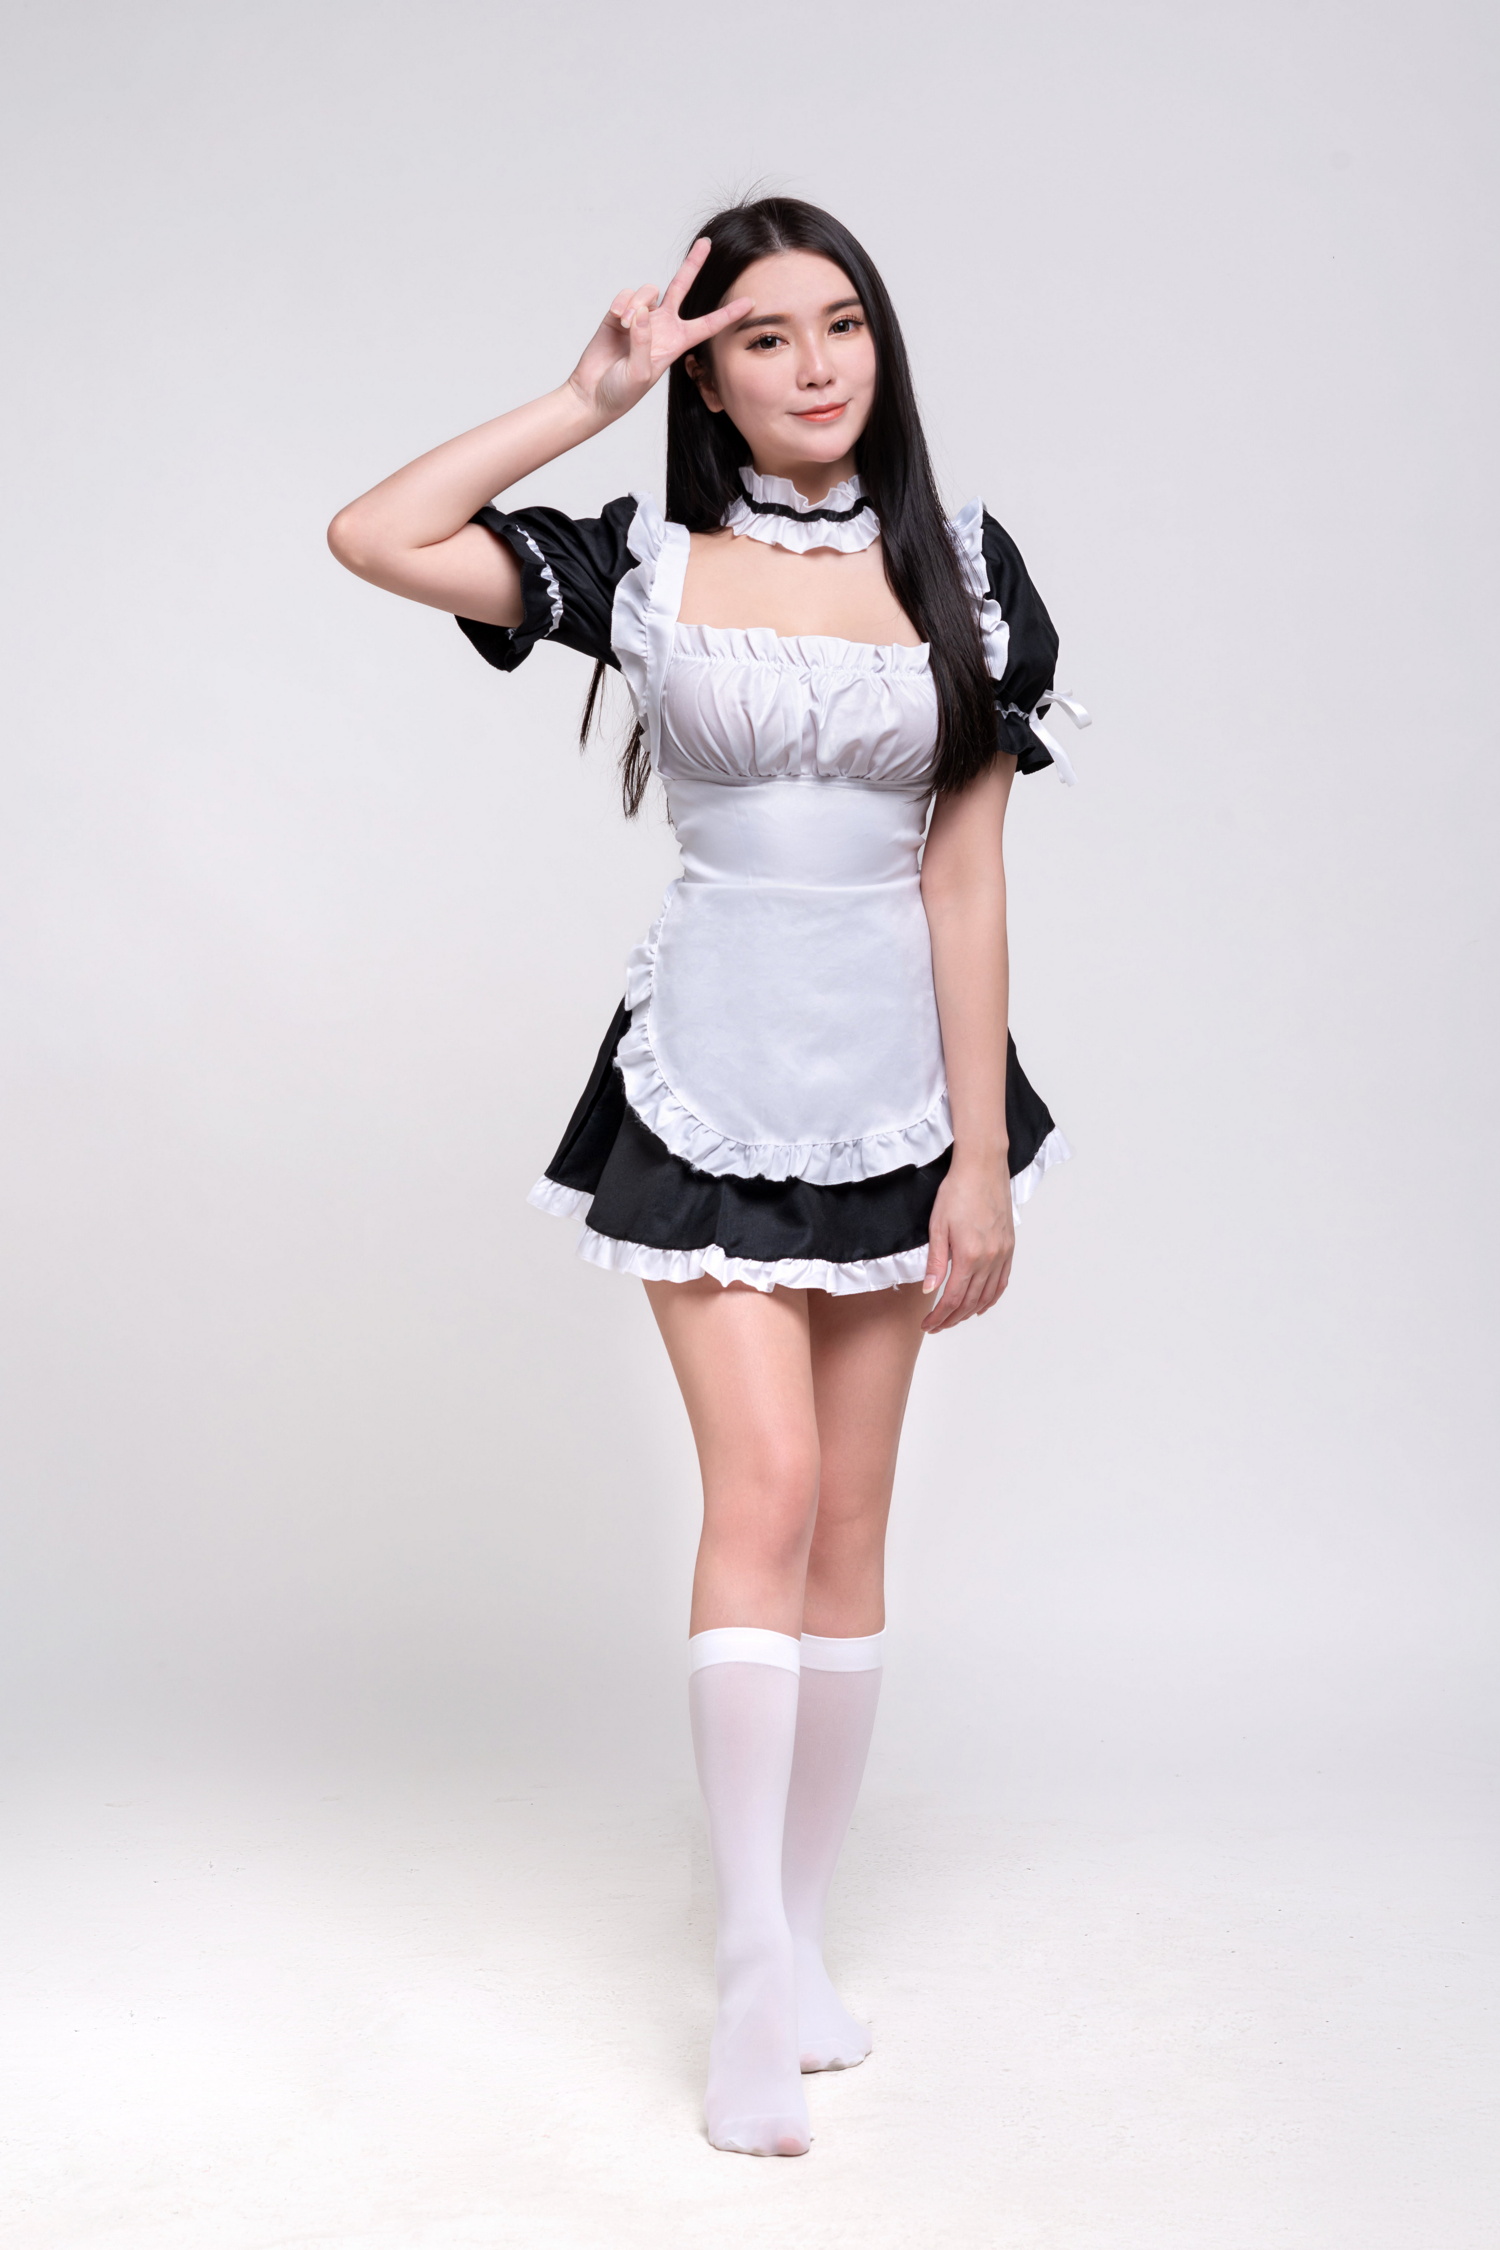 Asian Model Women Long Hair Dark Hair Maid Outfit White Background White Socks Victory Sign 1500x2250